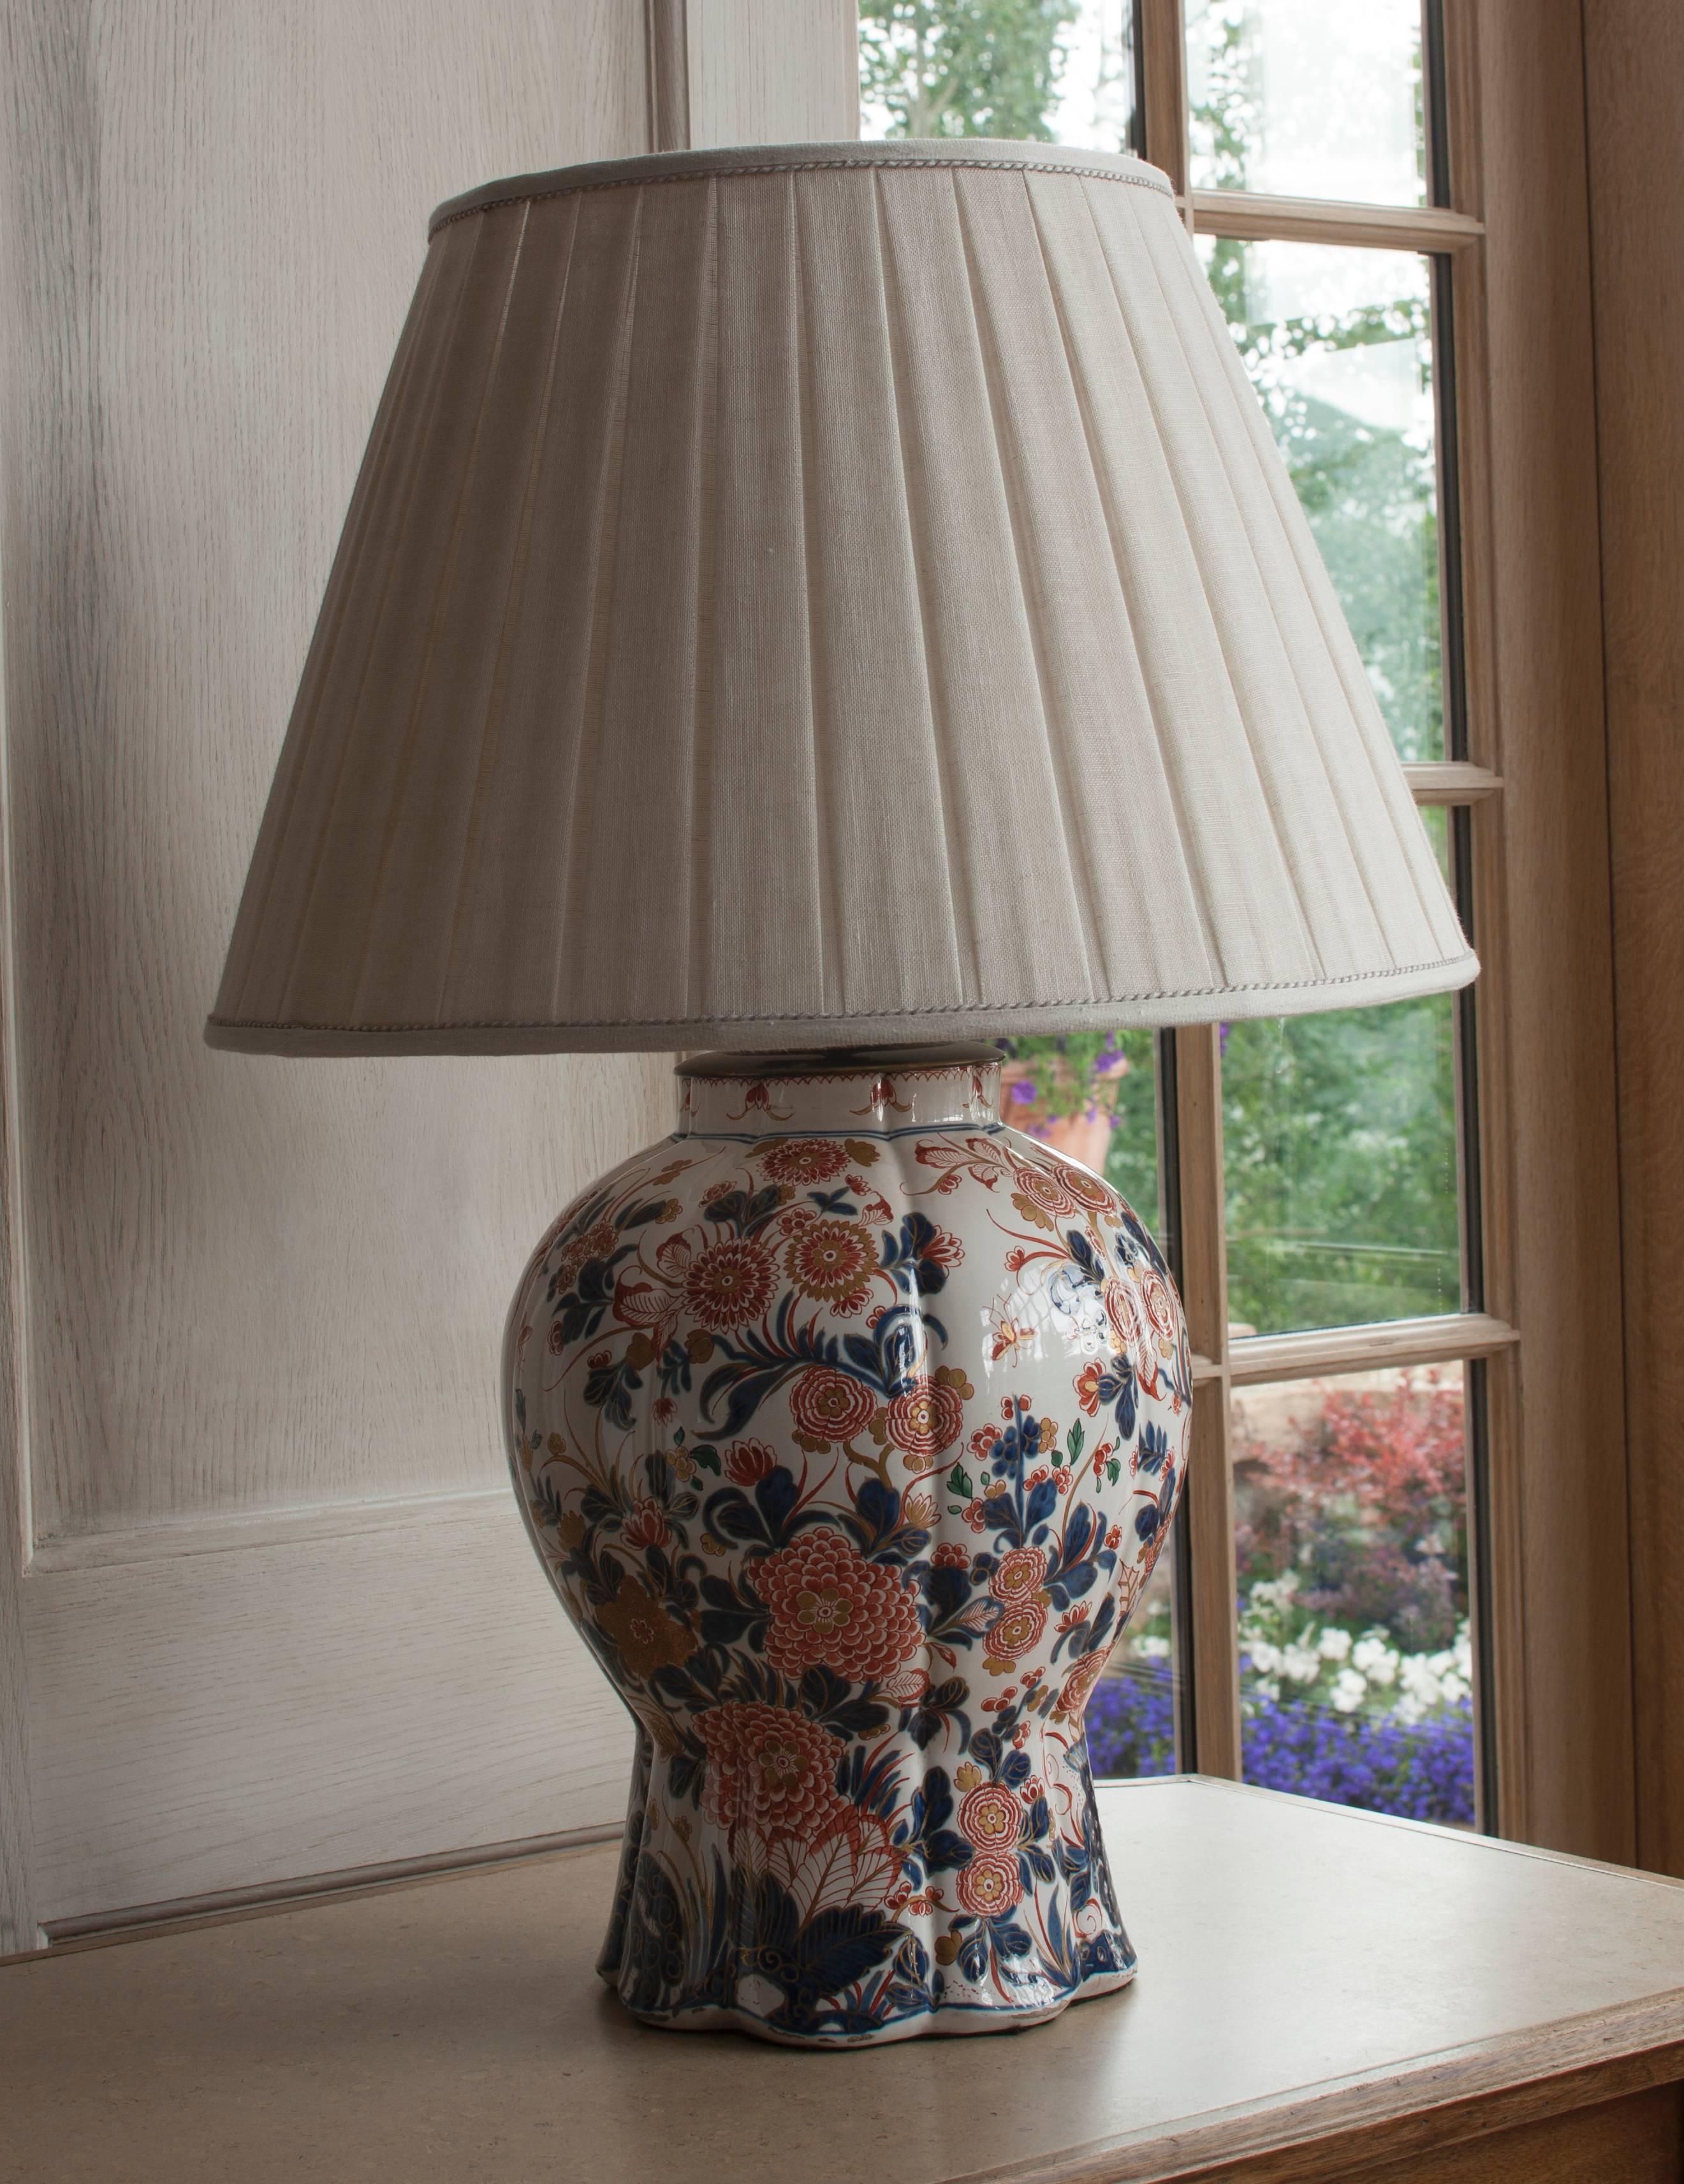 With Imari decoration and custom linen box-pleated shades. Height of vase alone is 15